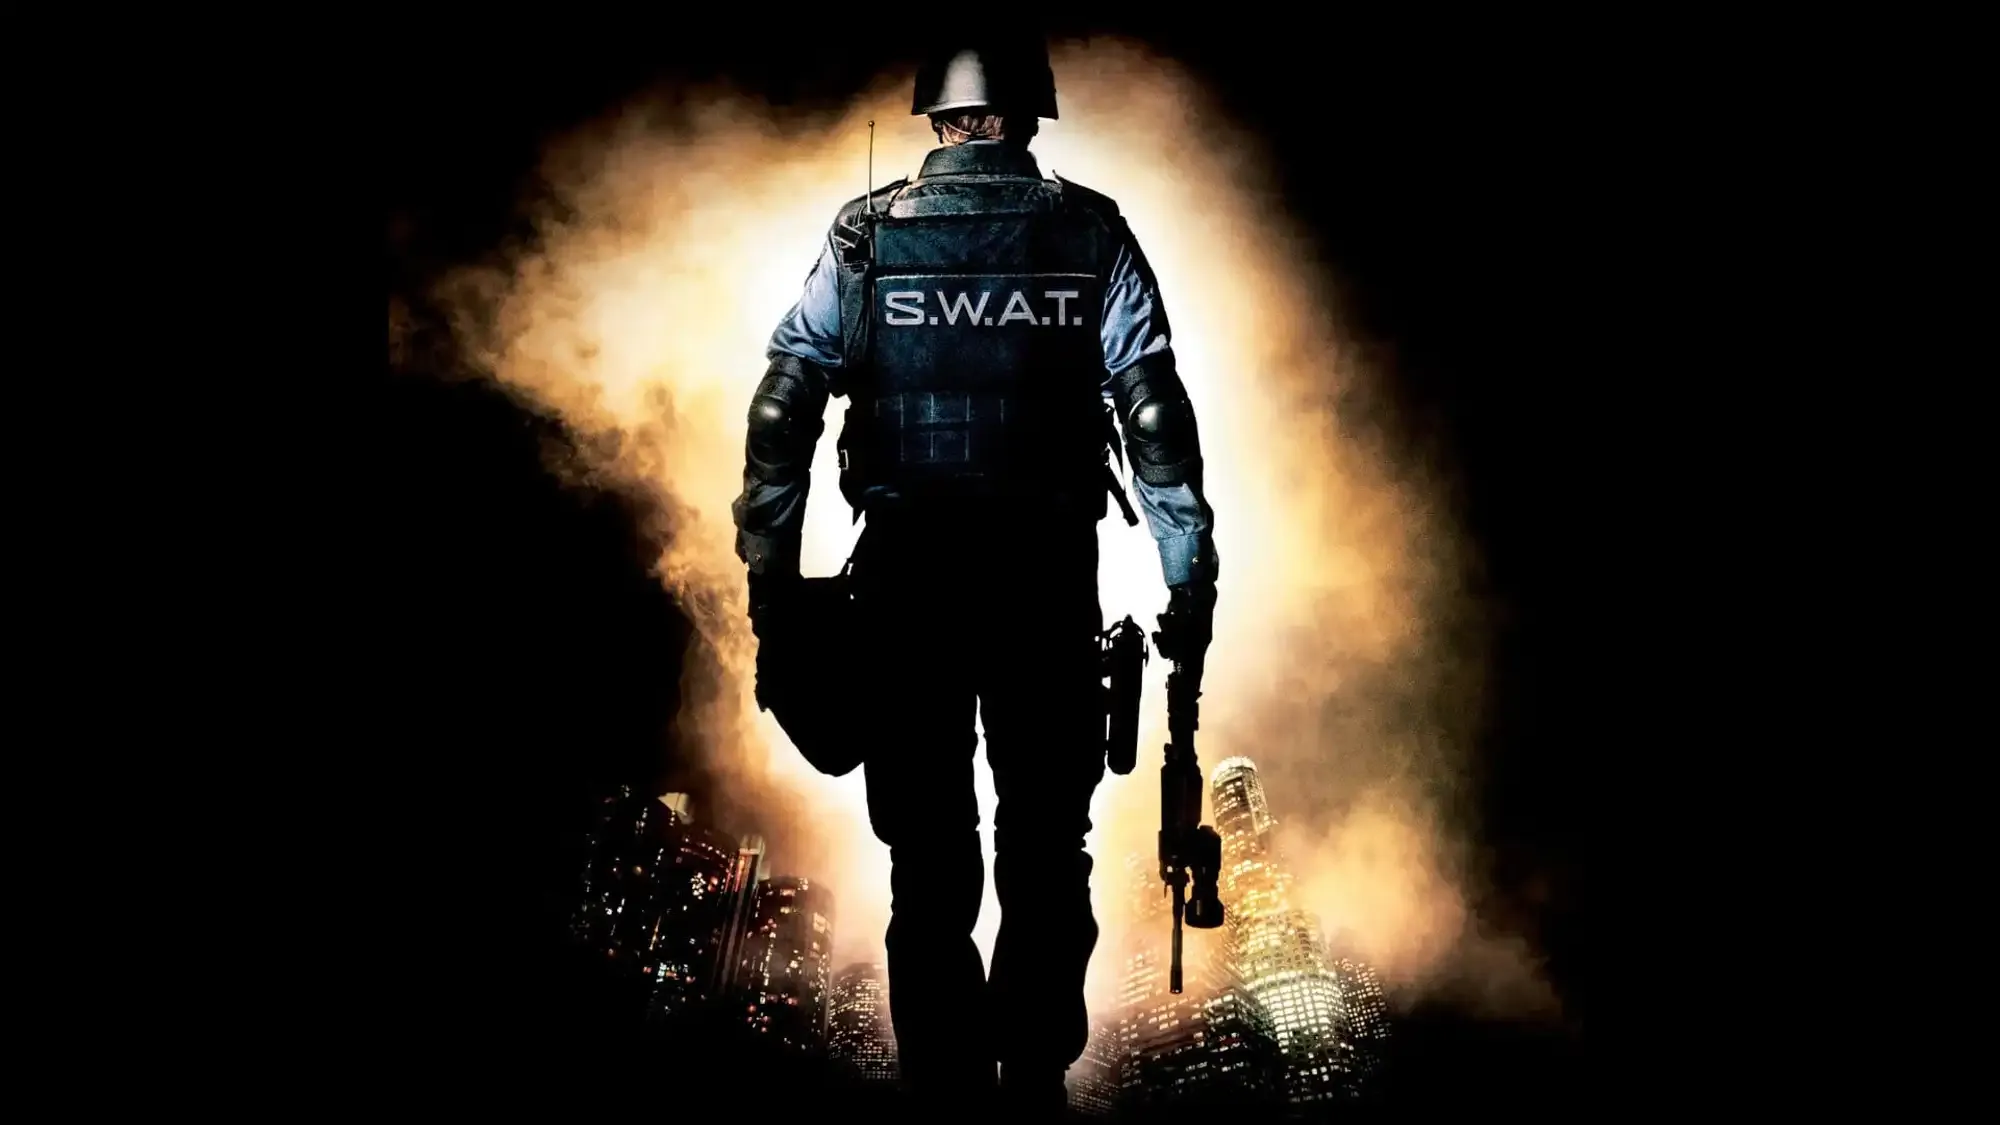 S.W.A.T. movie review